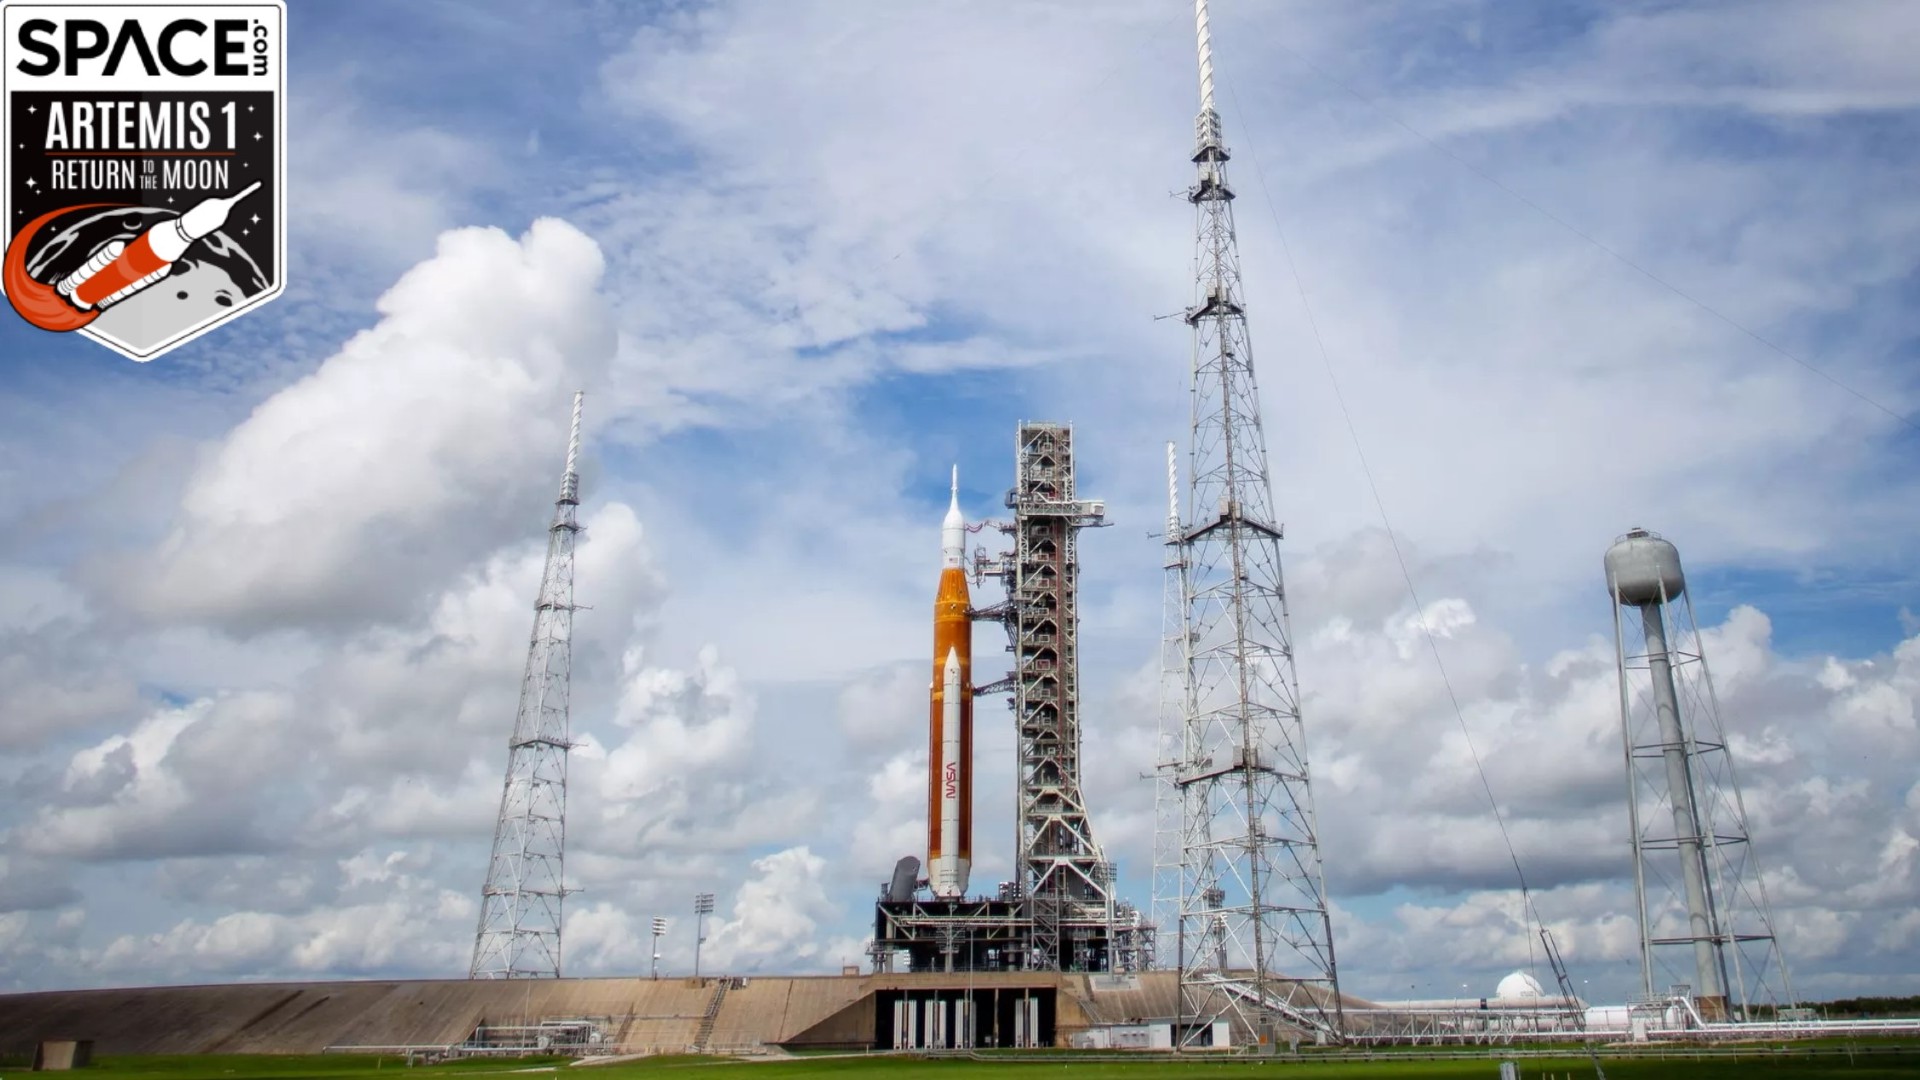 Weather looks good for Artemis 1 moon rocket's 2nd launch try, NASA says